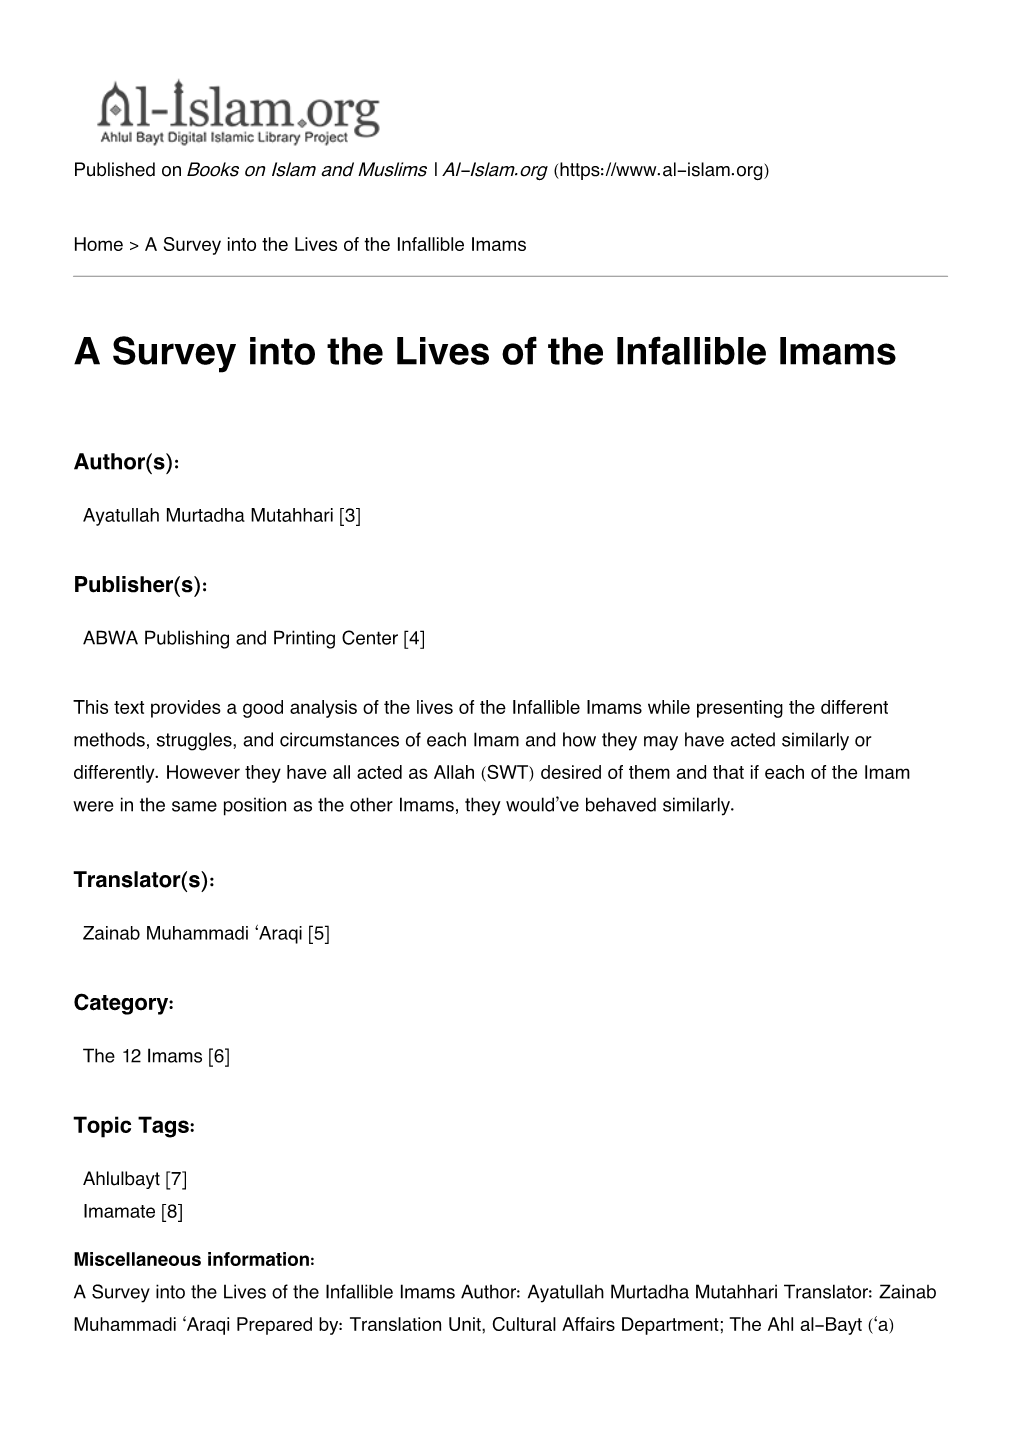 A Survey Into the Lives of the Infallible Imams